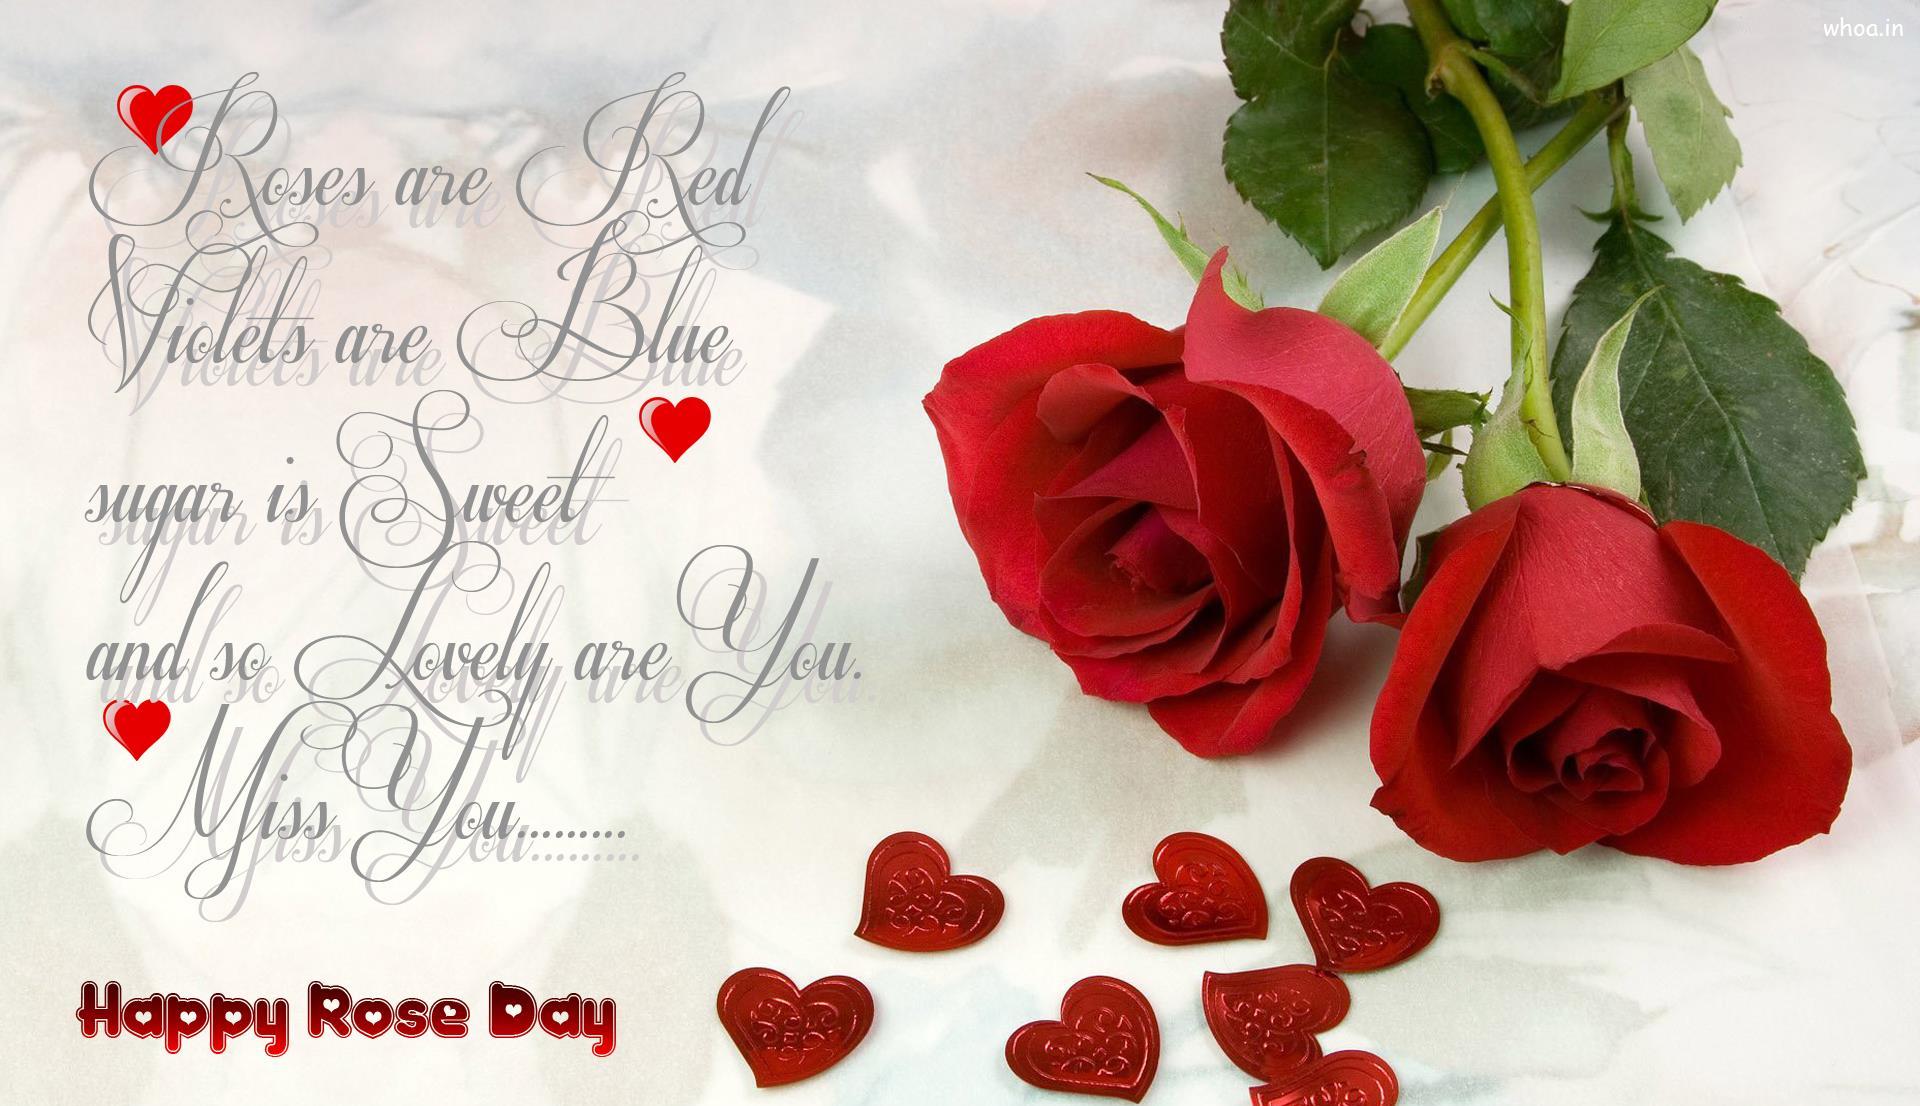 happy-rose-day-wallpaper-greetings-for-rose-day-and-quotes.